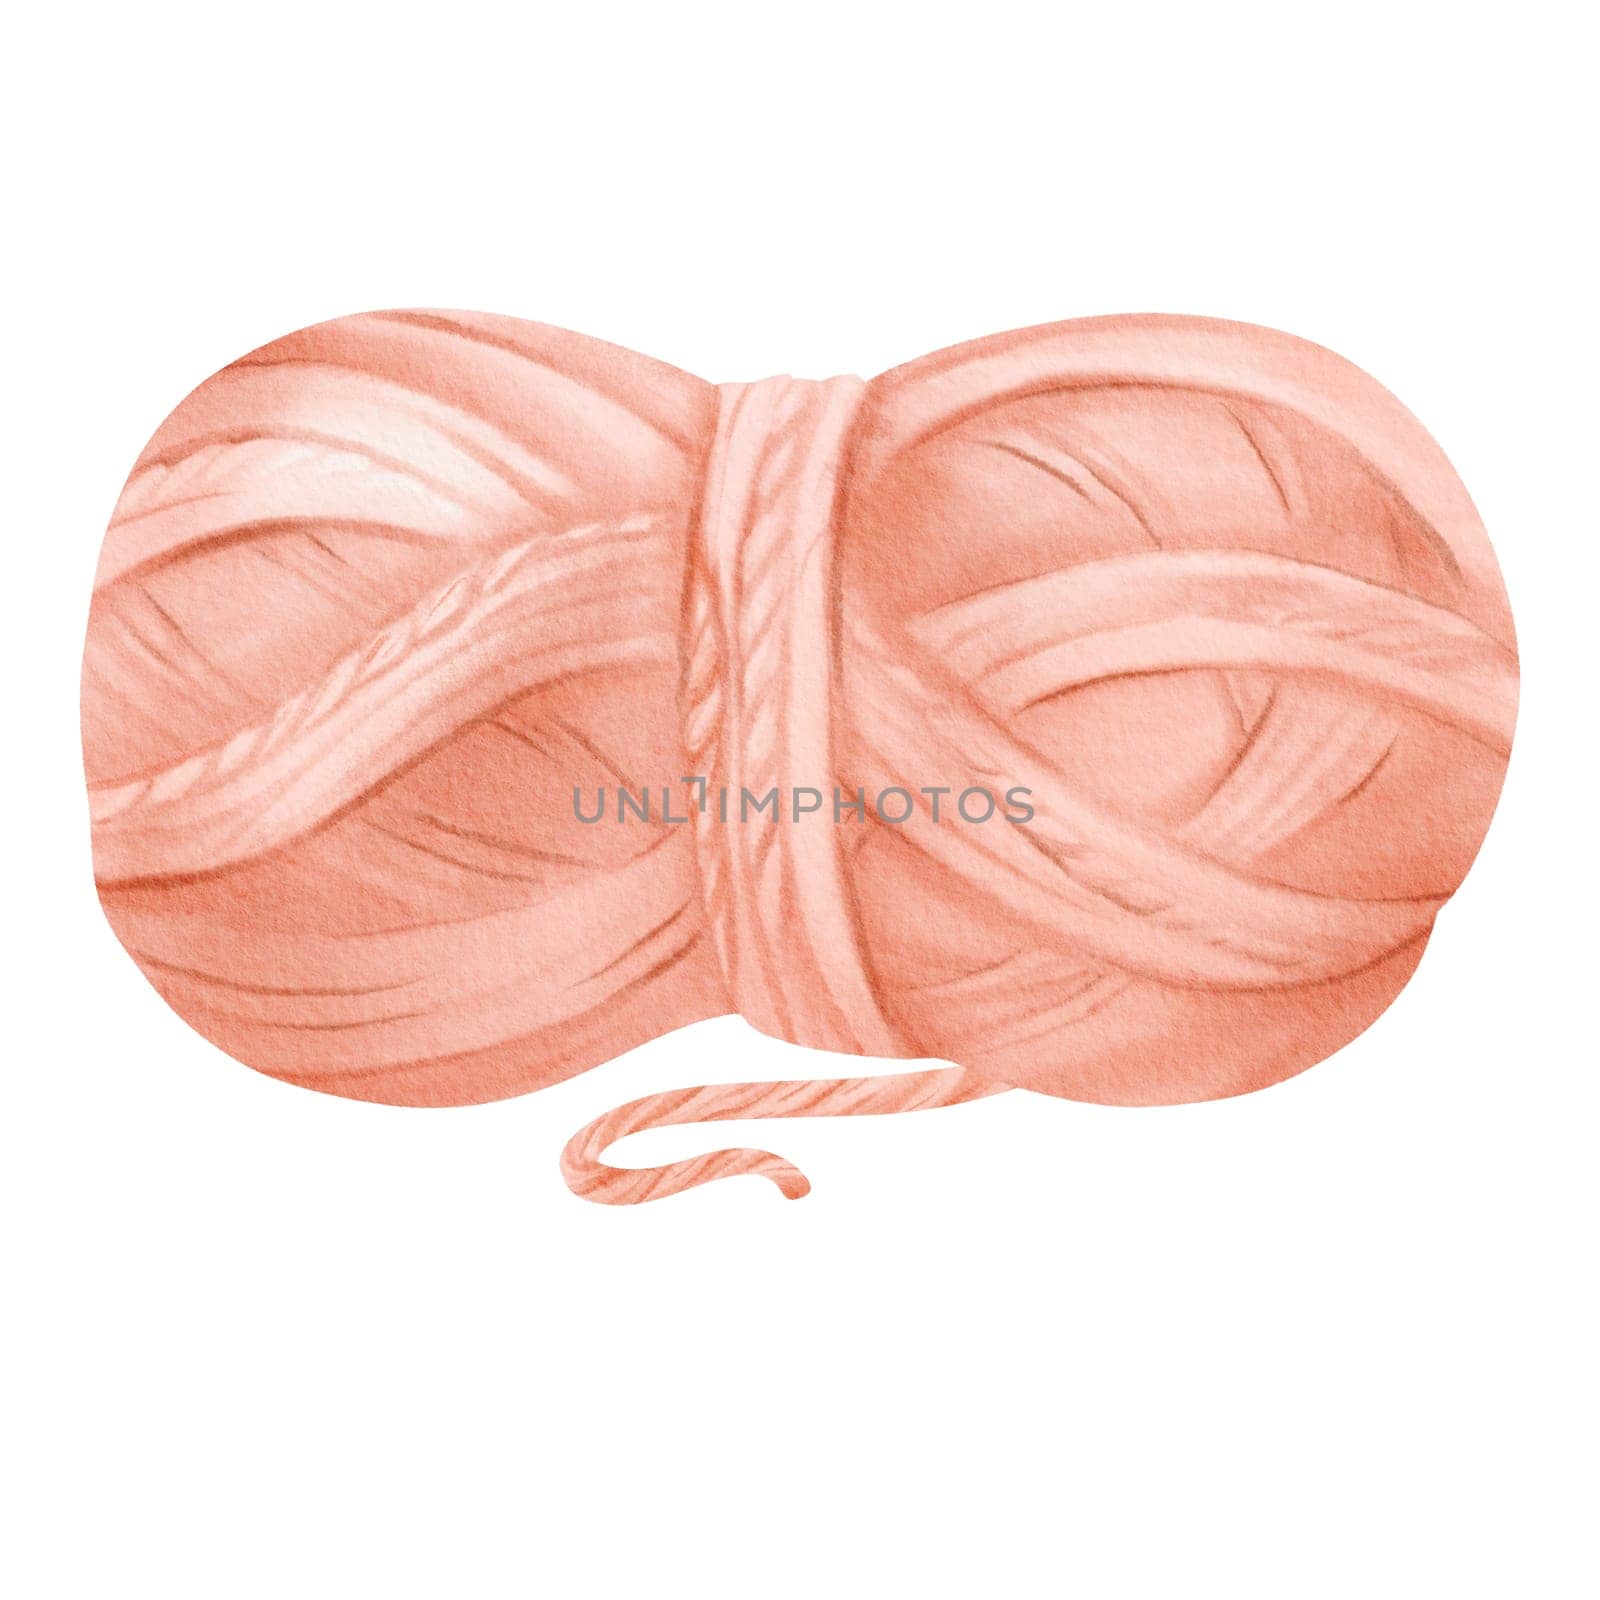 A watercolor illustration of a pink thread spool. Made of wool and cotton fibers. for crafting enthusiasts, sewing shops, textile manufacturers, educational materials for sewing and knitting classes by Art_Mari_Ka